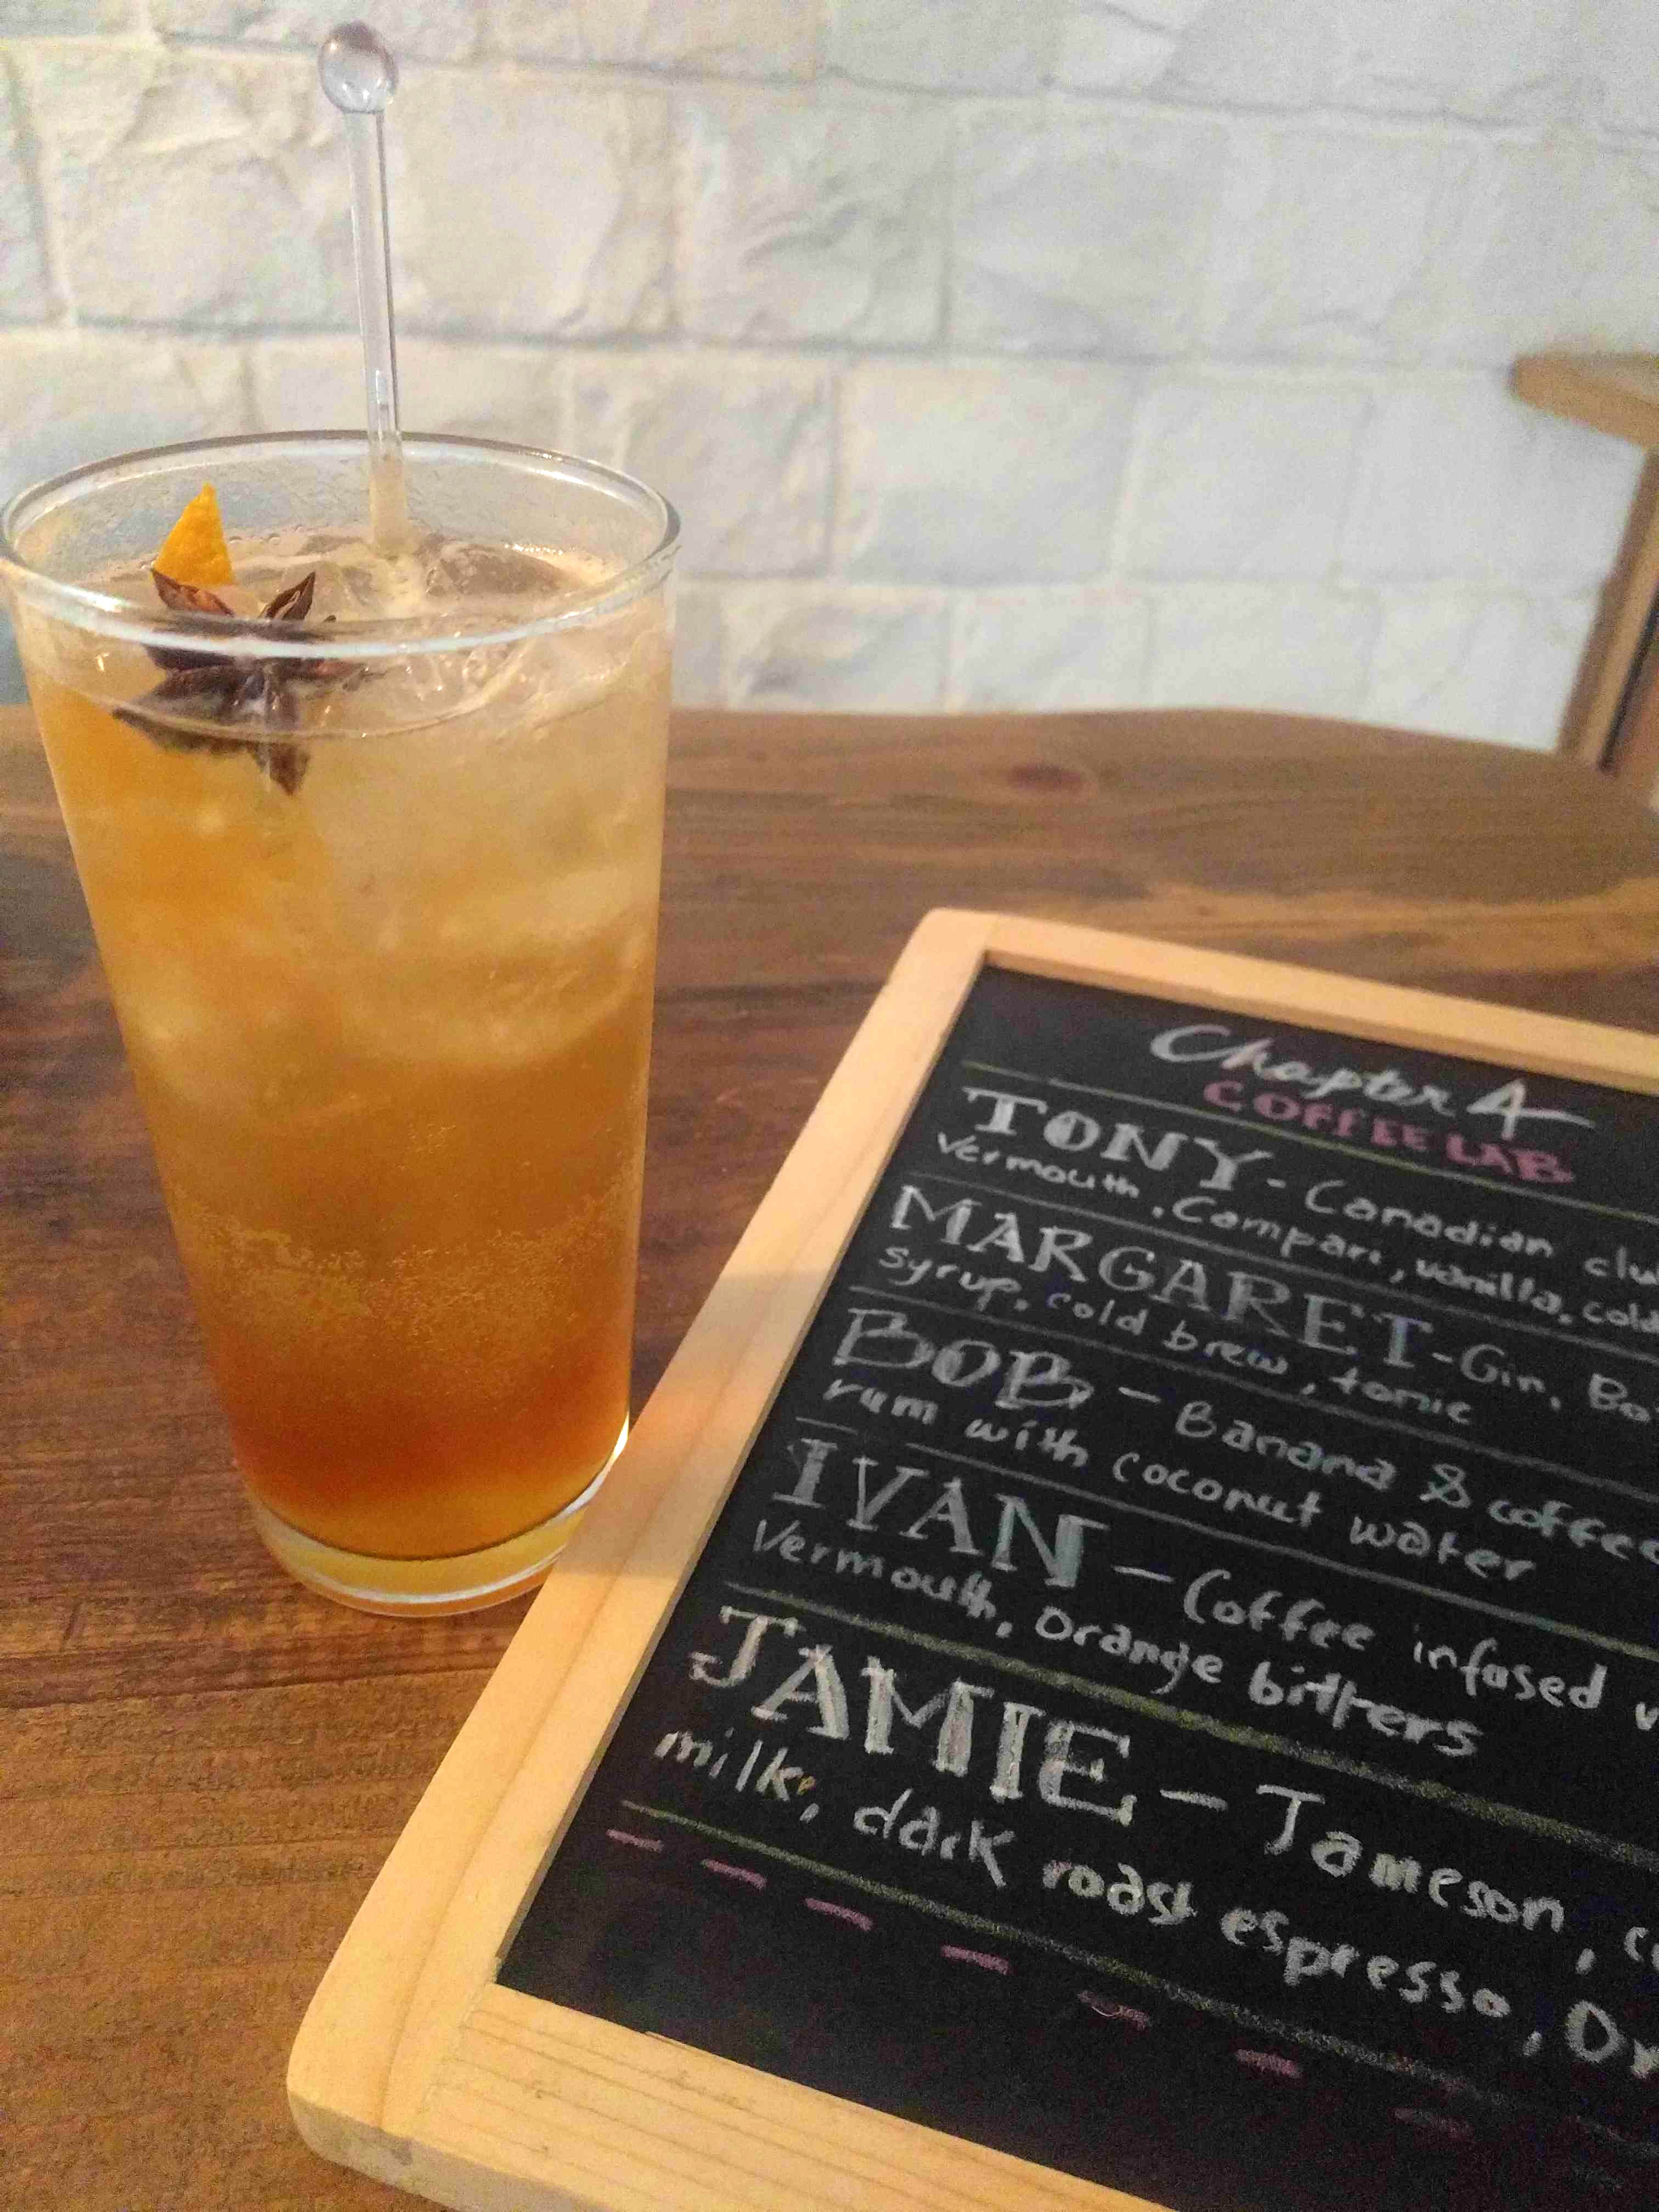 Drink,Alcoholic beverage,Distilled beverage,Dark 'n' stormy,Cocktail,Mai tai,Iced tea,Whiskey sour,Beer cocktail,Tea